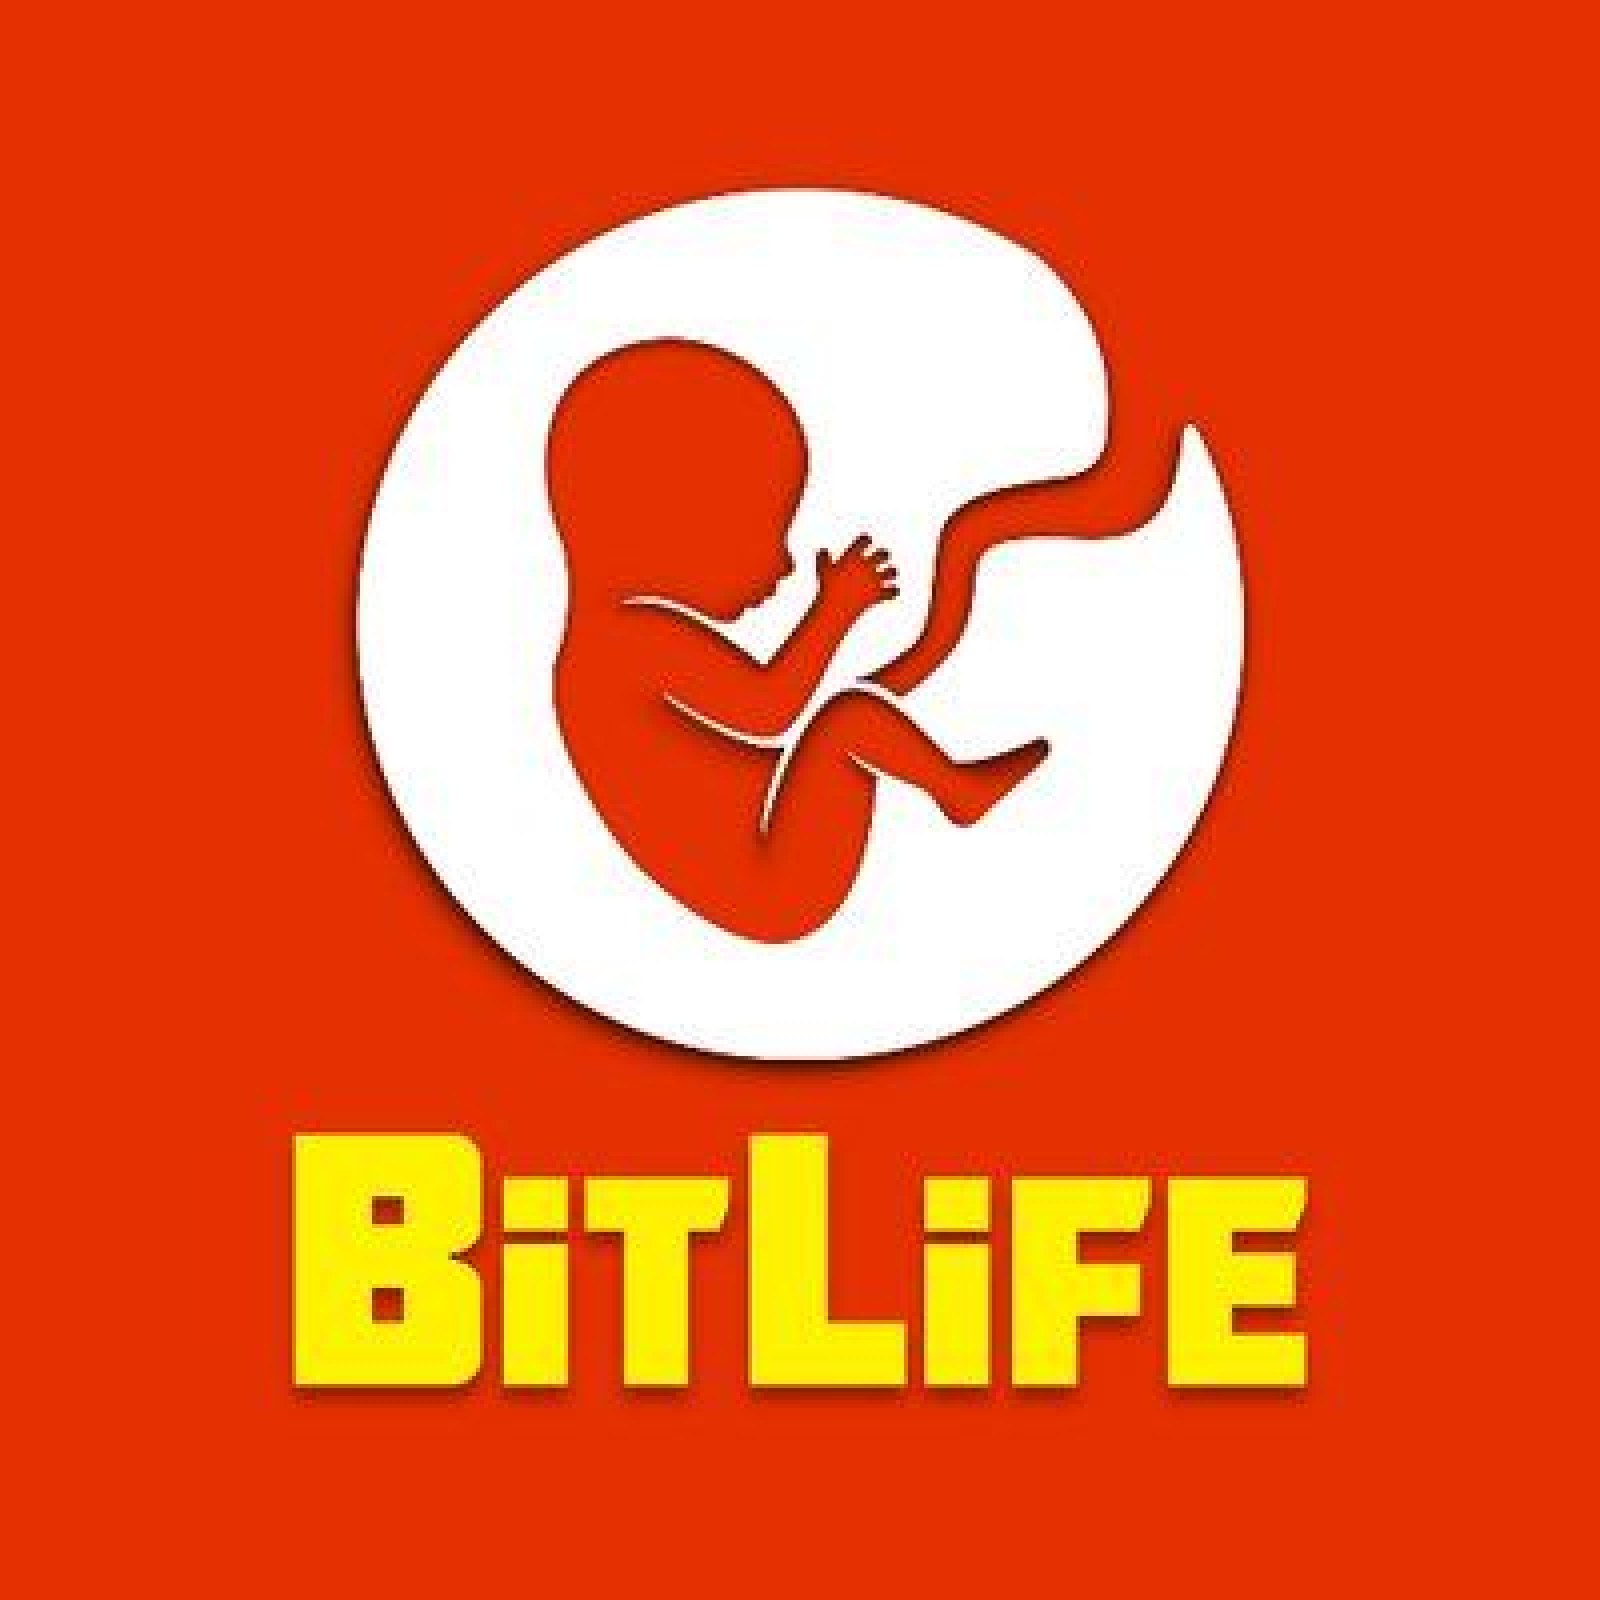 How To Play Bitlife?